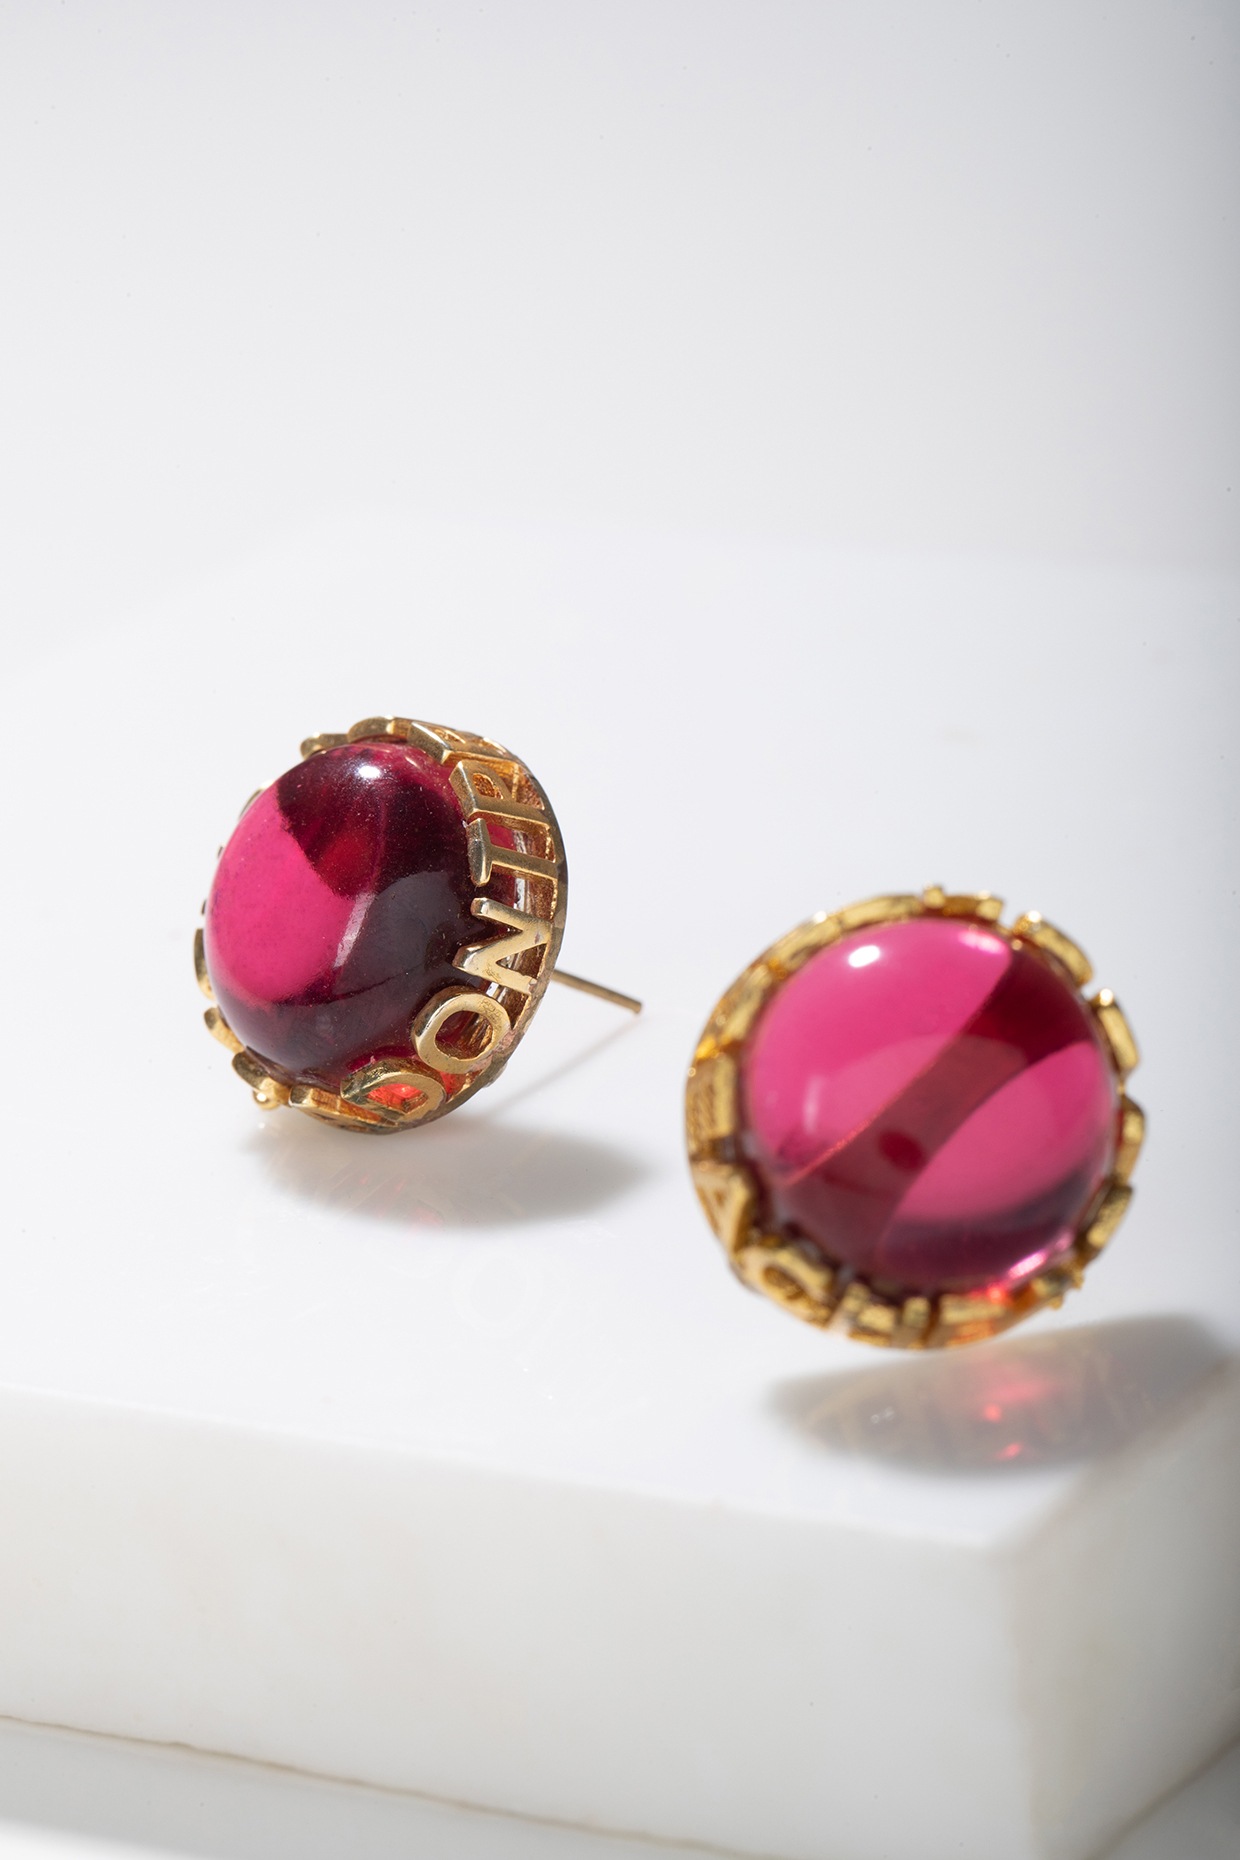 Antique 18ct yellow gold cabochon ruby and diamond fancy earrings —  Gembank1973